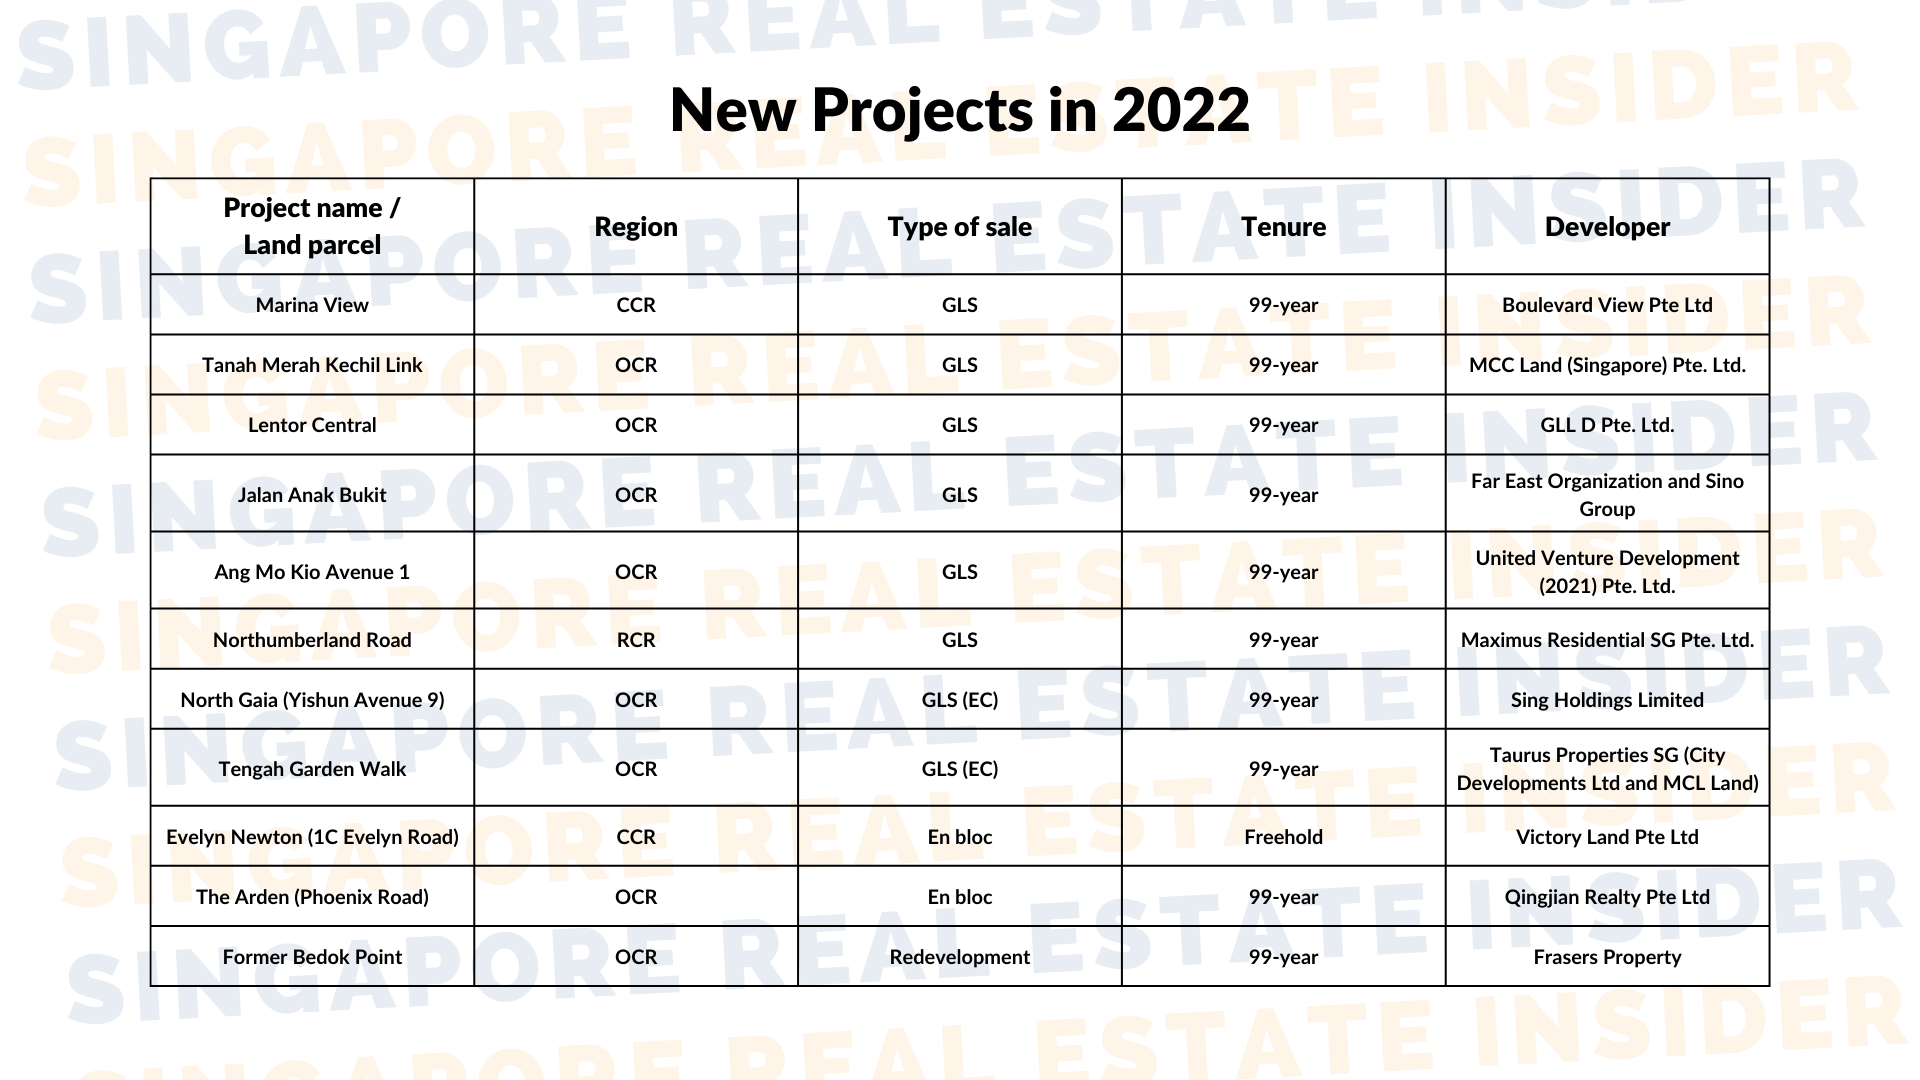 New Projects in 2022